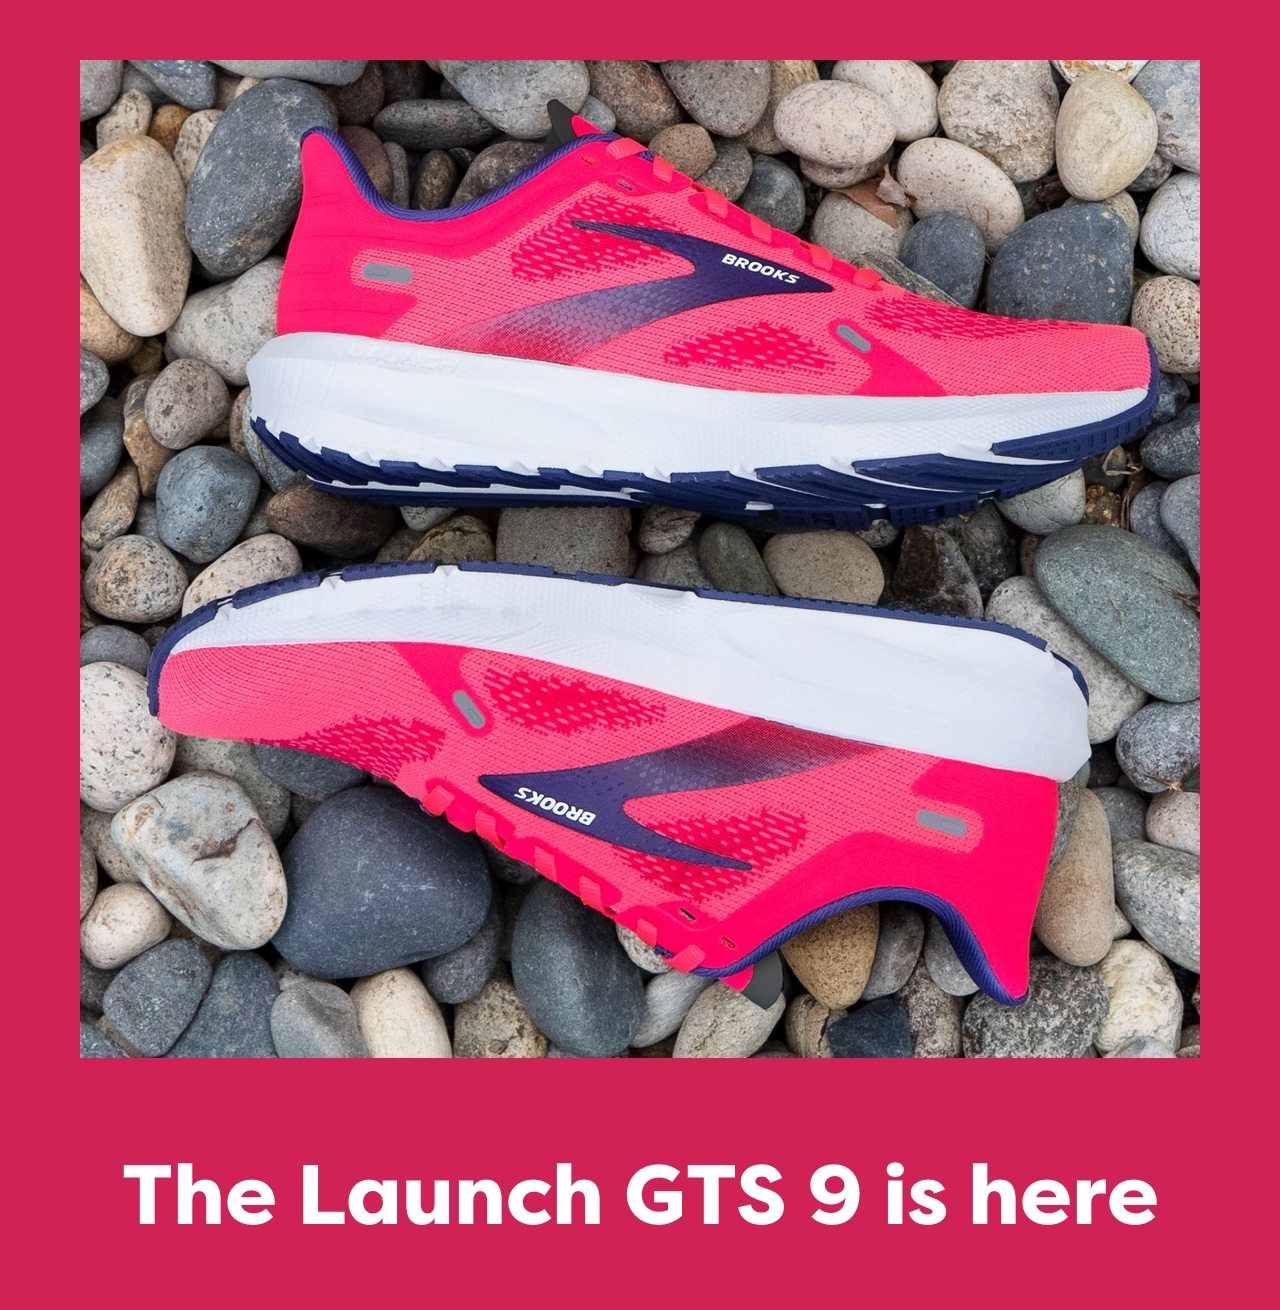 The Launch GTS 9 is here